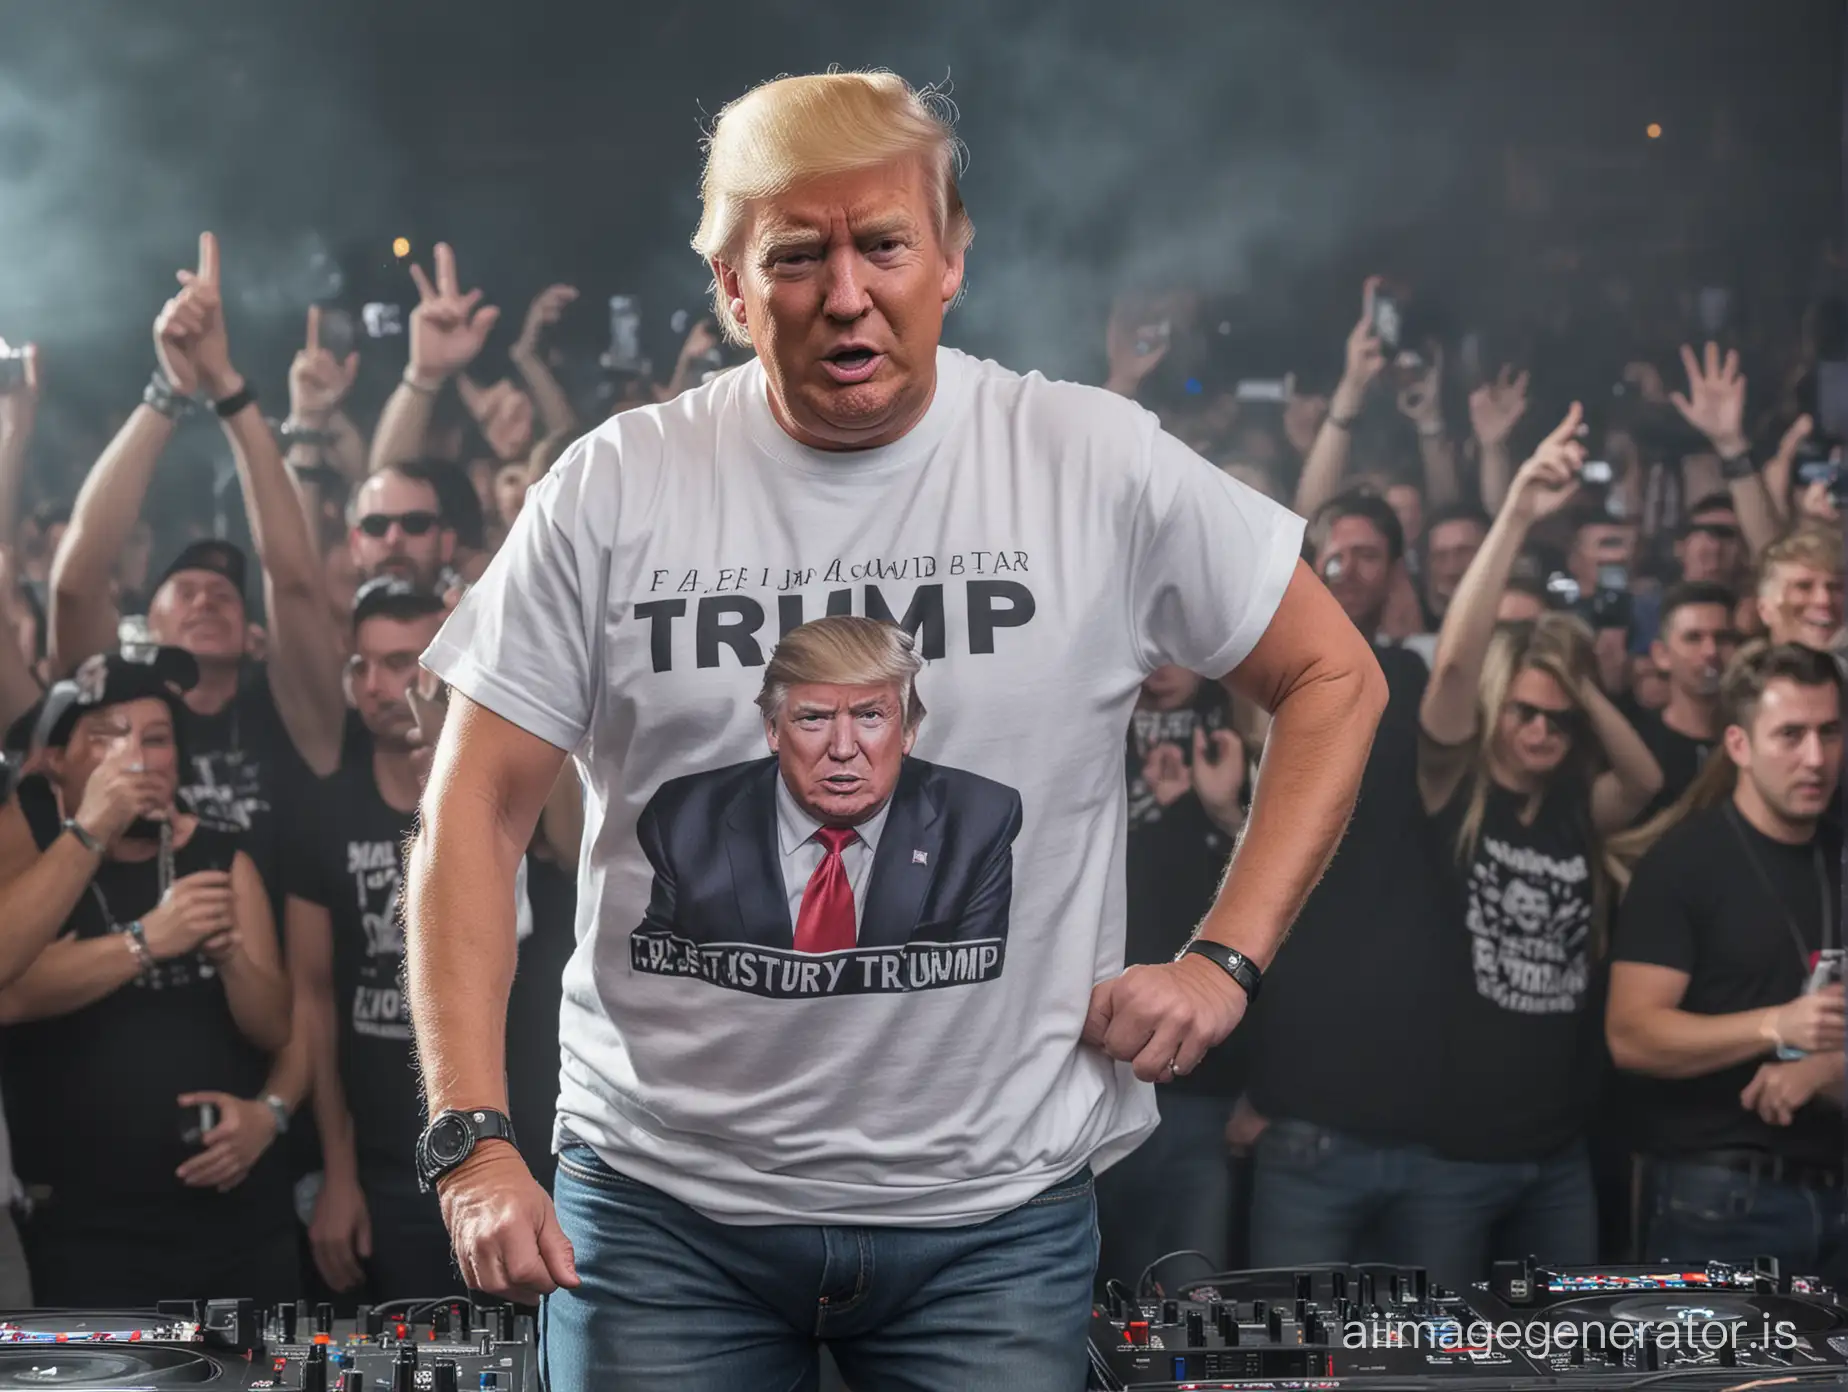 Donald Trump is a DJ at a techno rave. He is wearing a T-shirt and jeans.